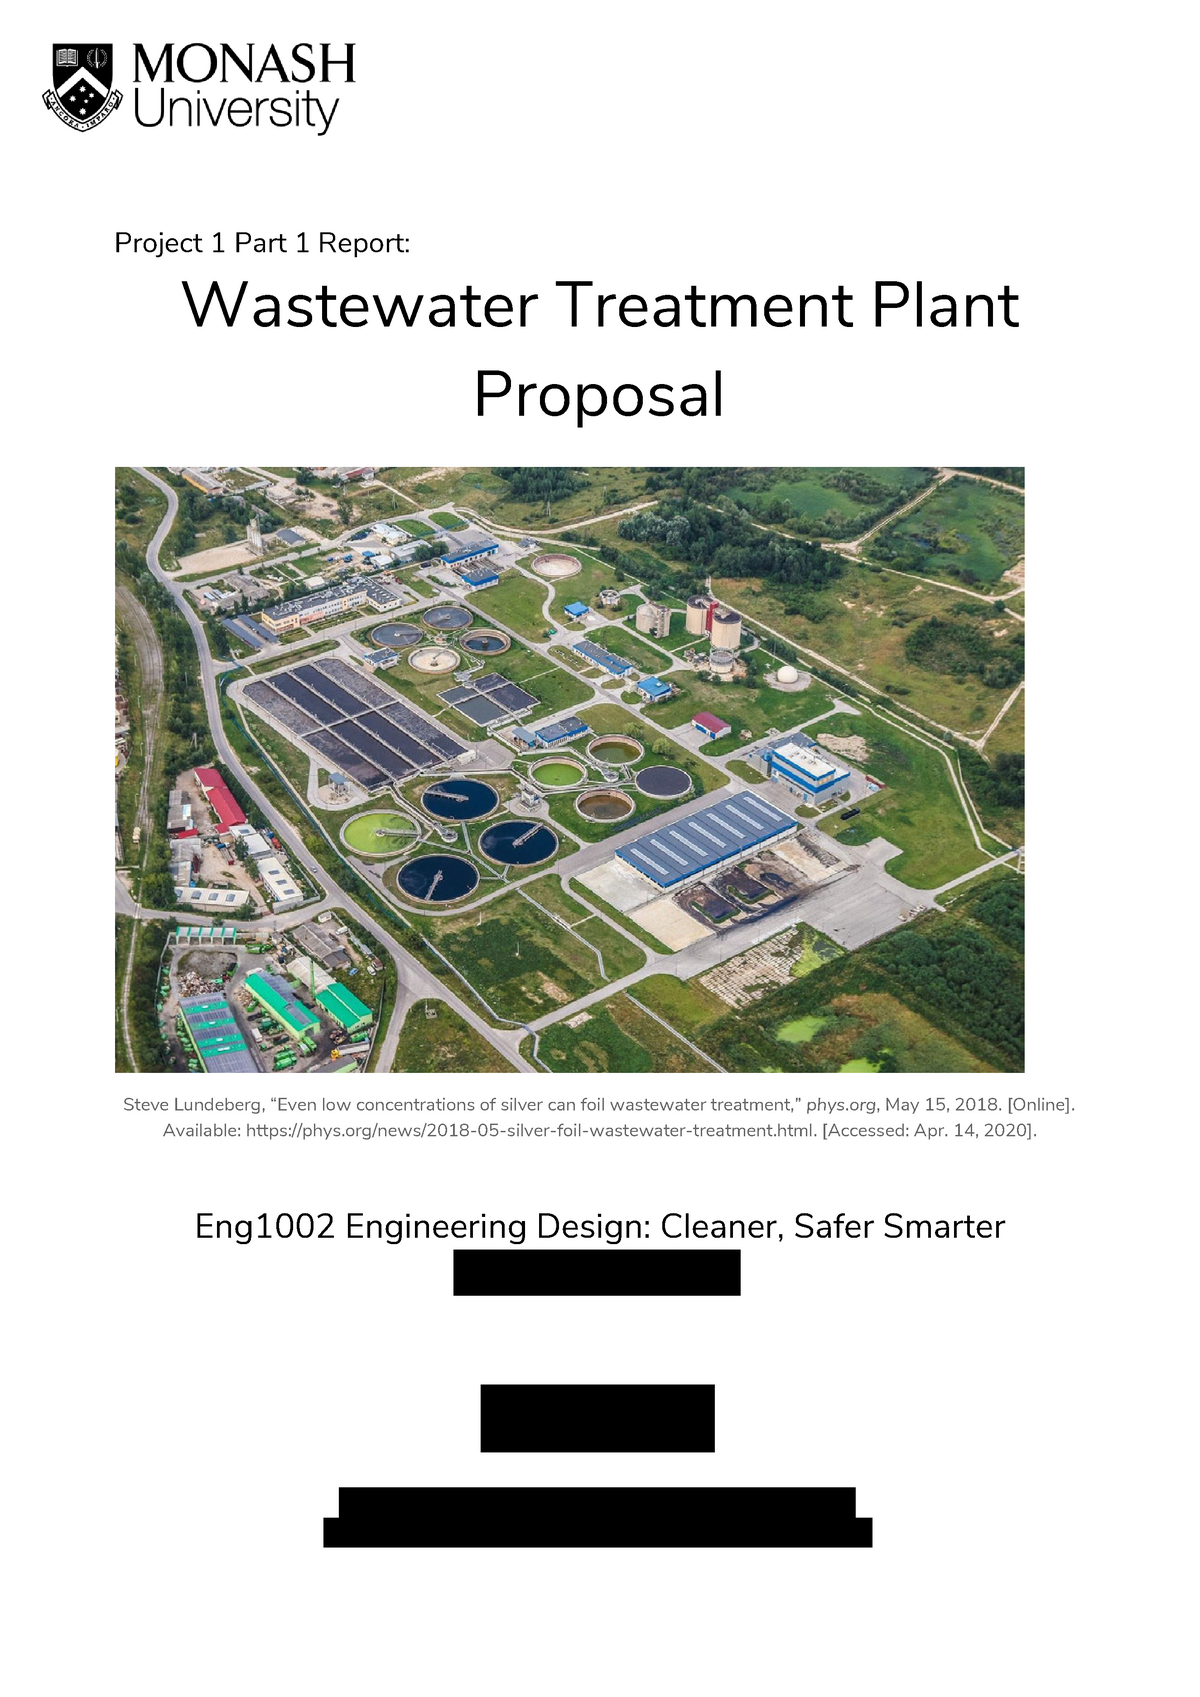 wastewater treatment plant research paper